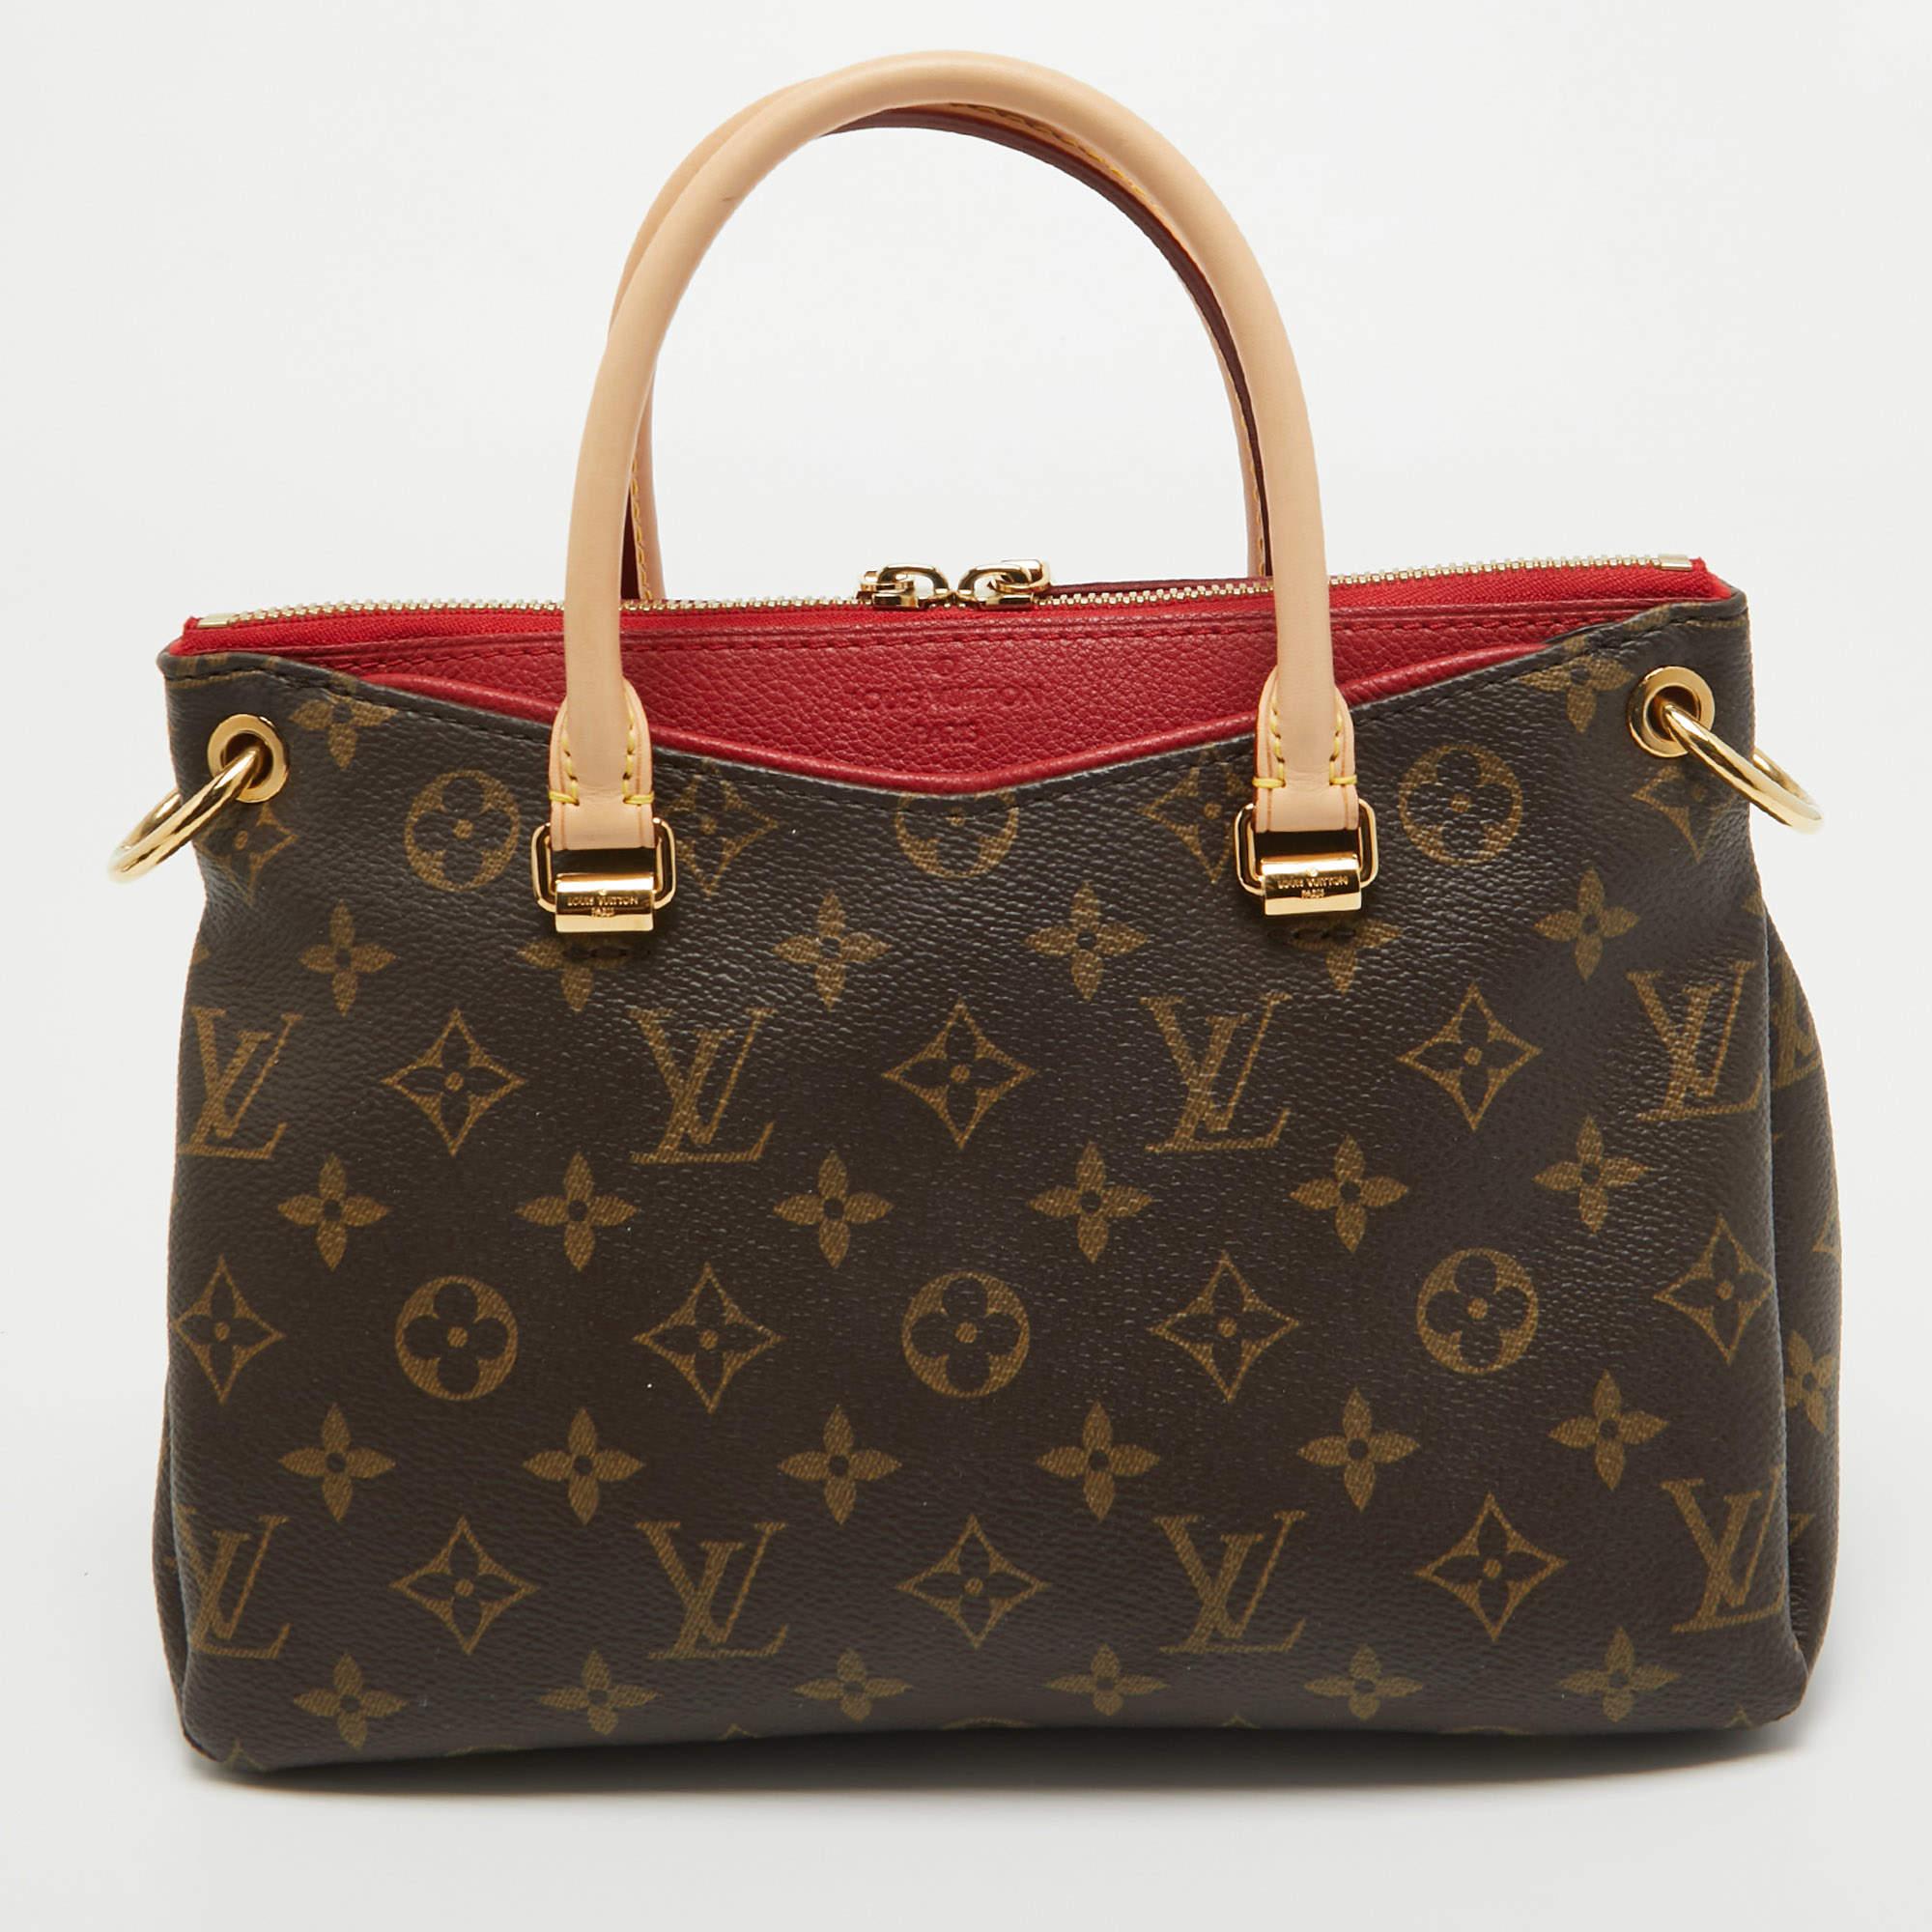 Accessorise like a pro with this trendy and functional bag from Louis Vuitton. This rich and classy Pallas bag is made from Monogram Canvas into a smart silhouette. The inside of the bag is lined with Alcantara that has a smooth texture. It features